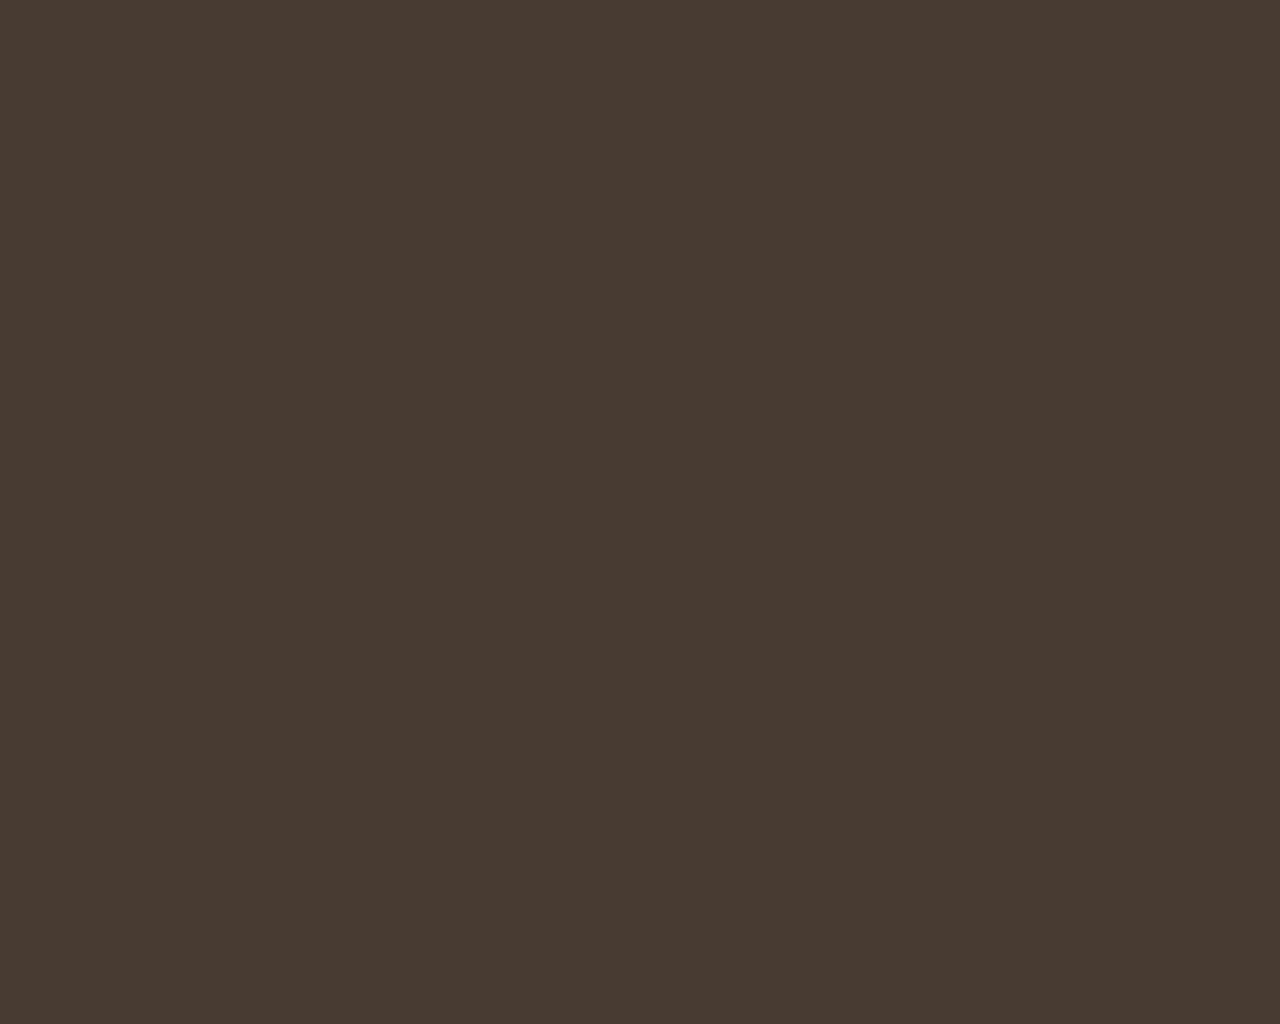 1280x1024 Dark Taupe Solid Color Background